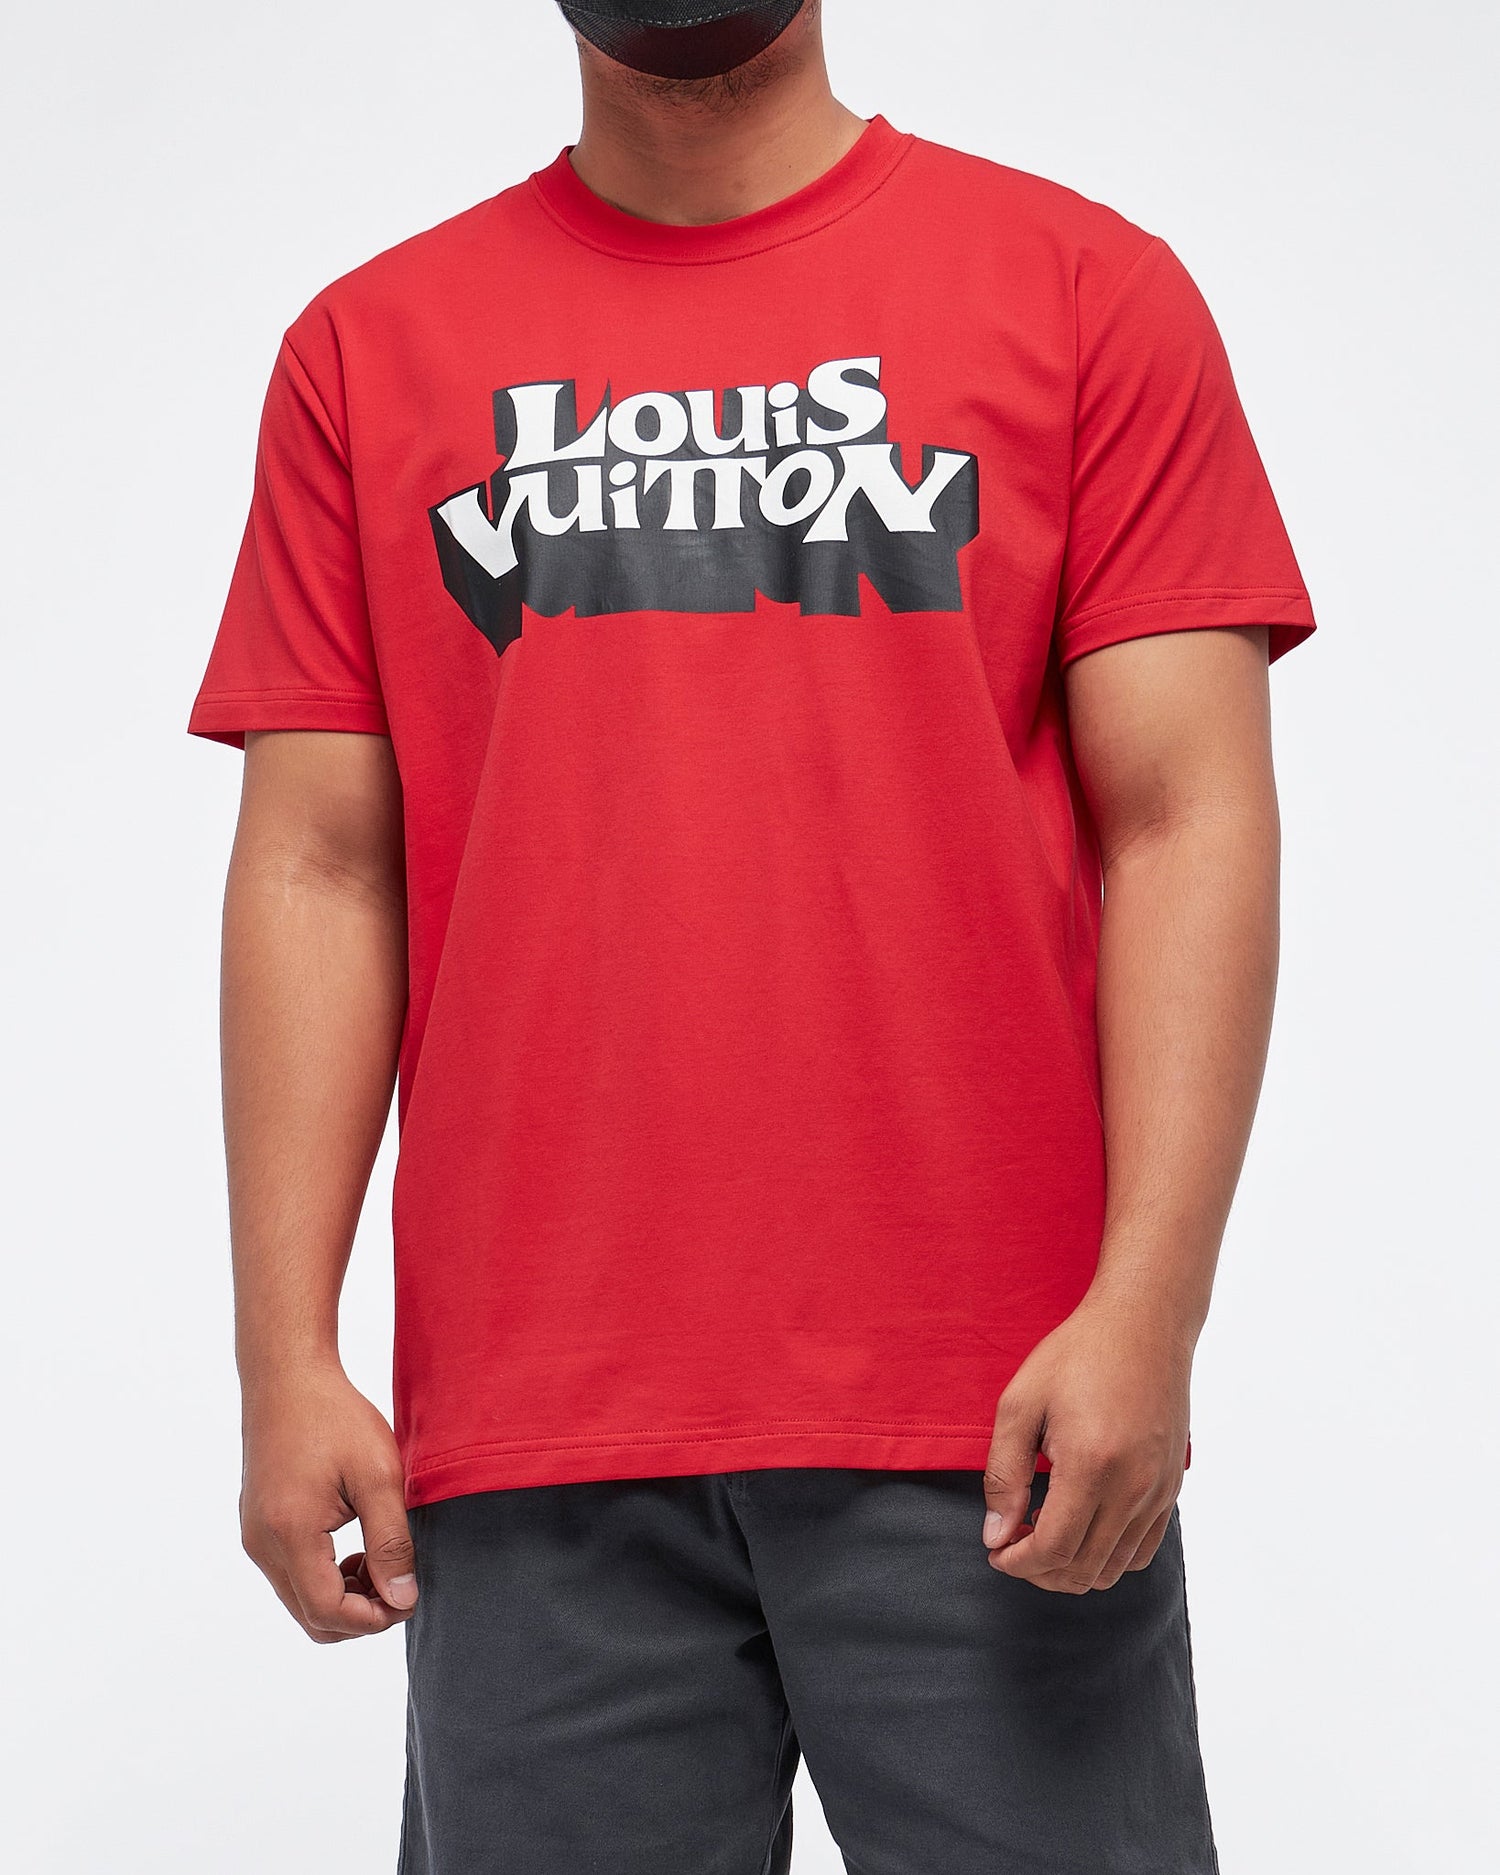 MOI OUTFIT-LV Graphic Men T-Shirt 15.90